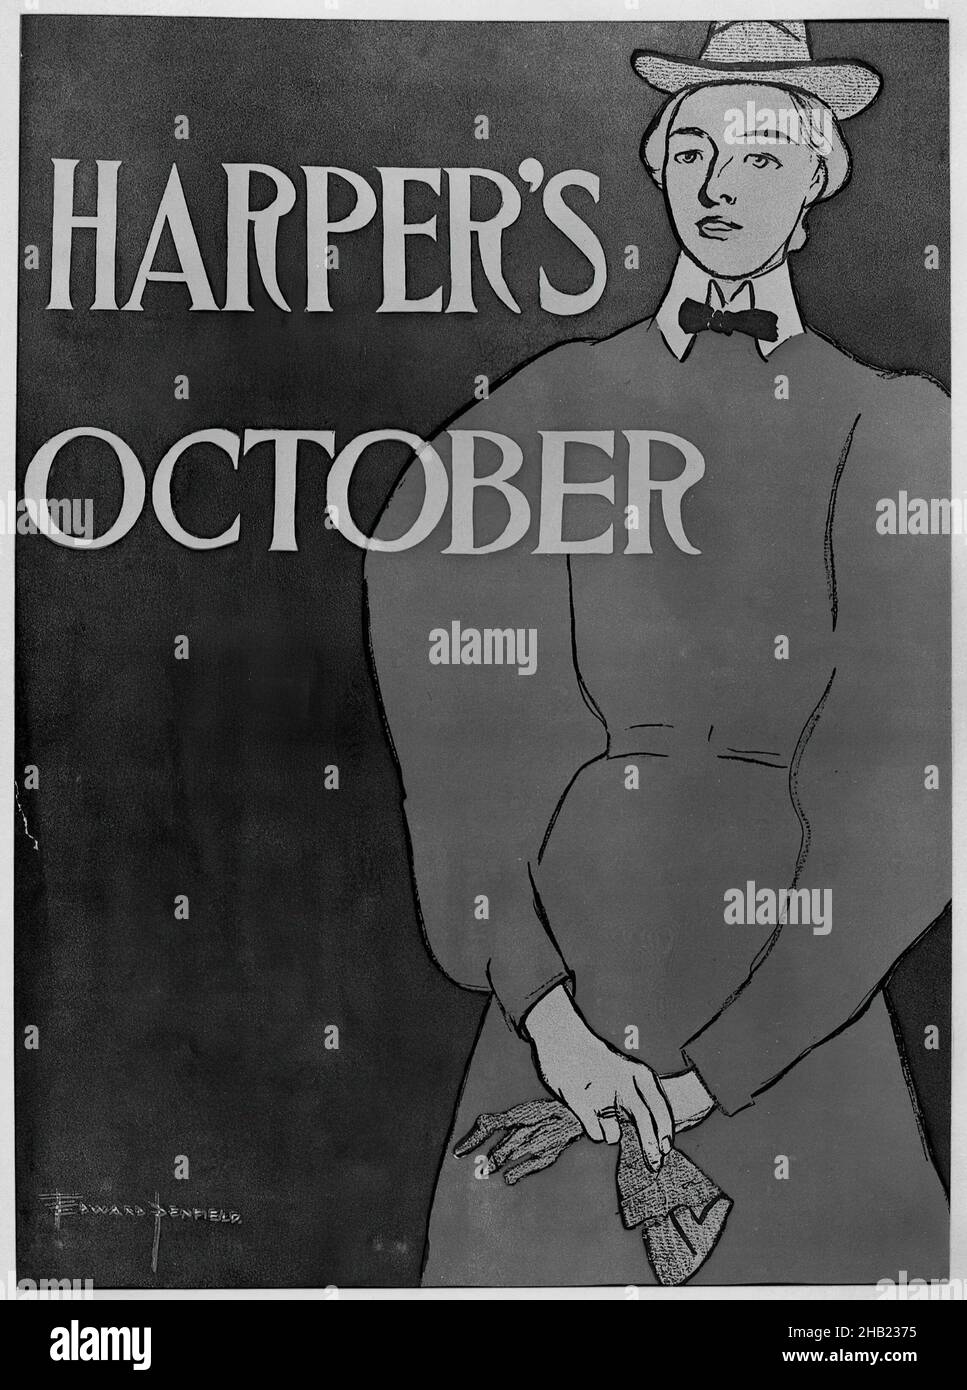 Harper's Poster, Edward Penfield, American, 1866-1925, Lithograph on wove paper, ca. 1894-1898, Sheet: 18 1/4 x 12 in., 46.4 x 30.5 cm Stock Photo